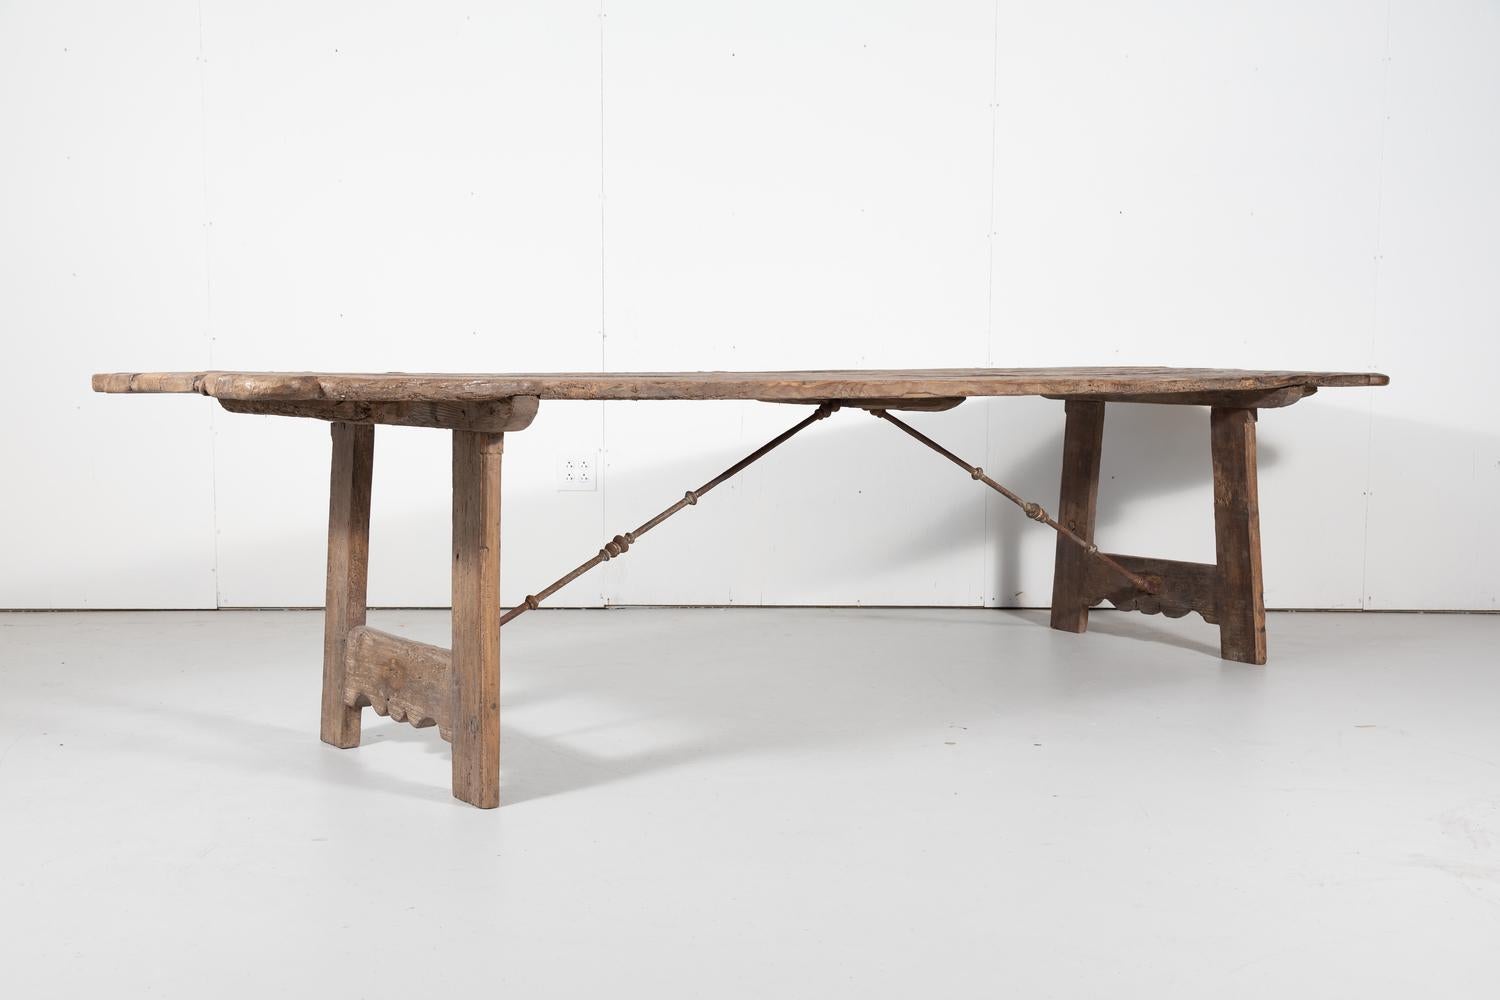 Wood Early 18th Century French Trestle Table with Iron Stretcher